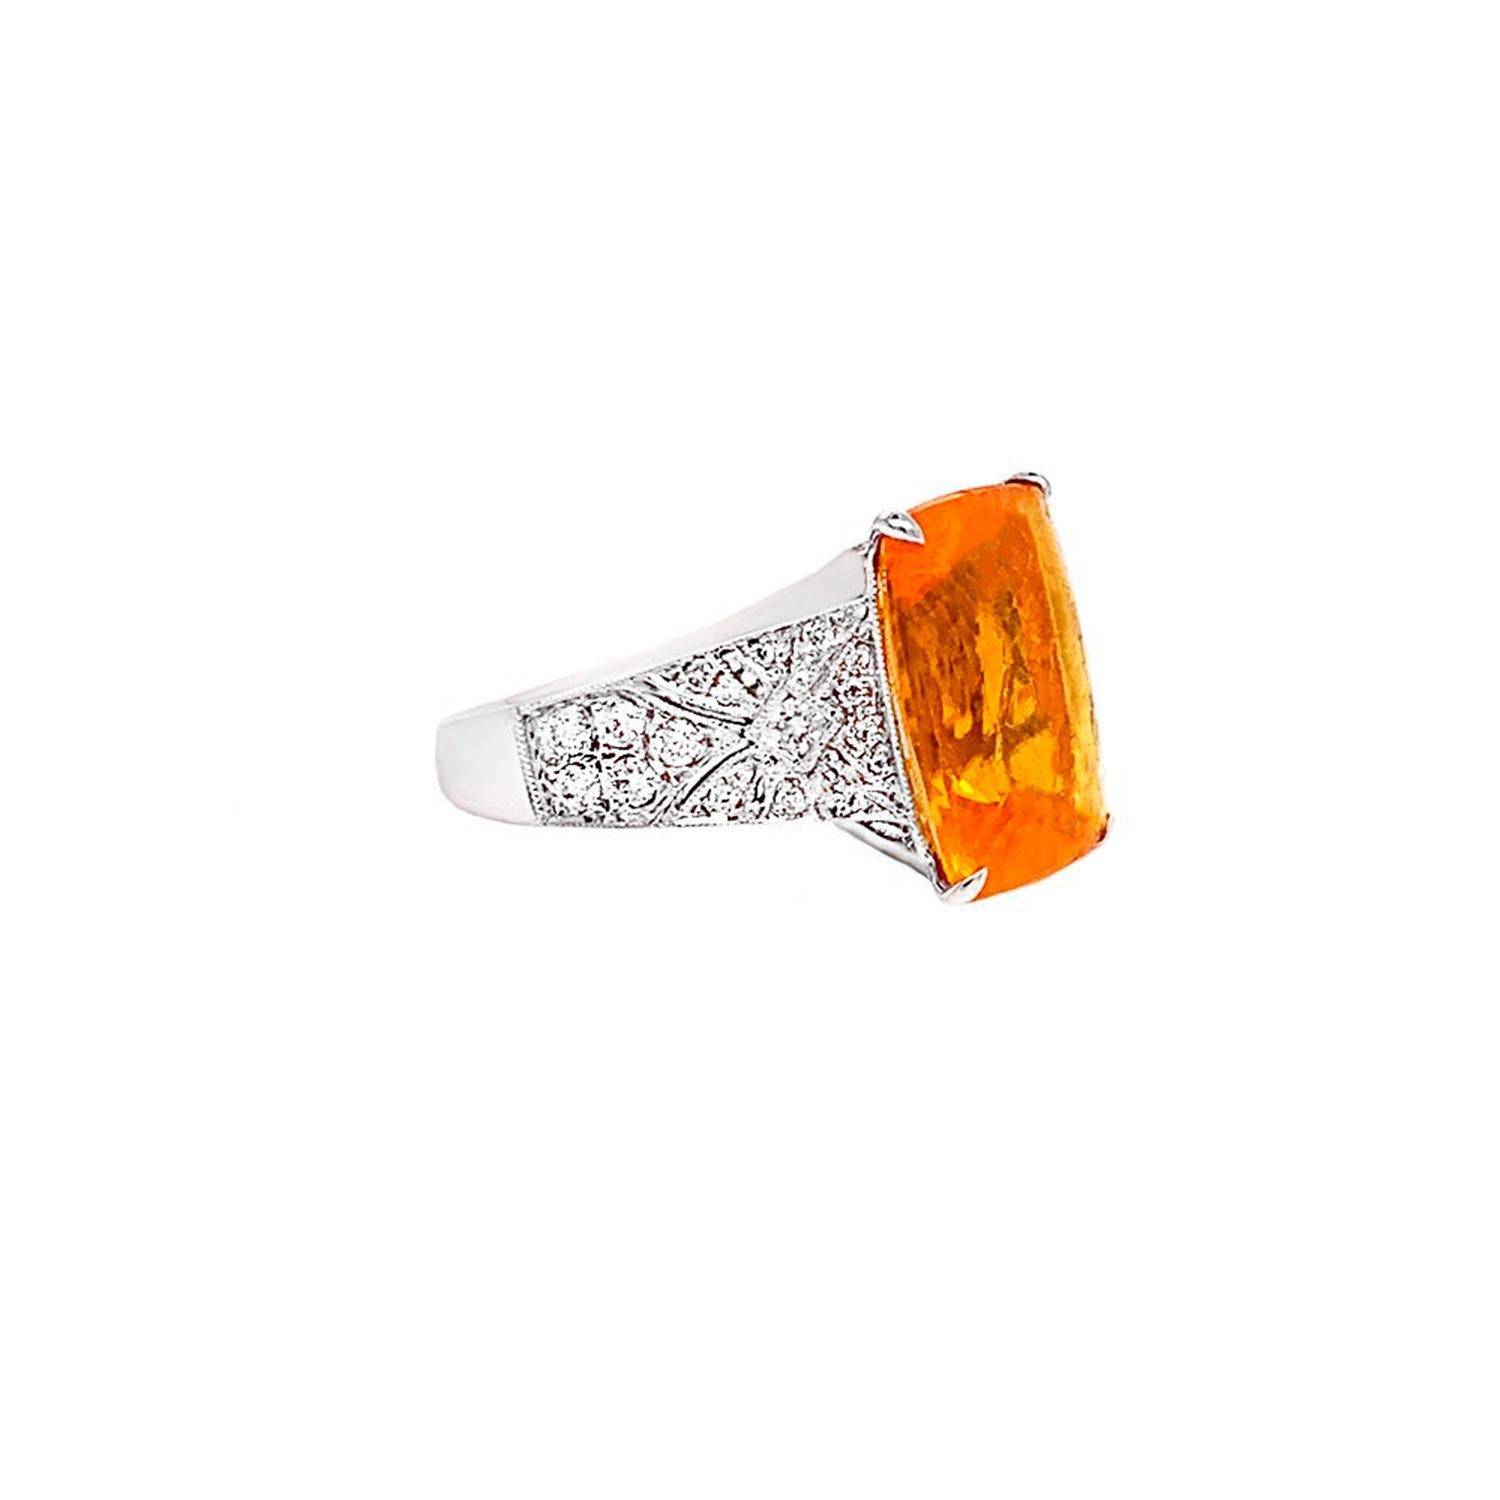 Fire Opal Ring With Diamonds 5.18 Carats 14K White Gold In Excellent Condition For Sale In Laguna Niguel, CA